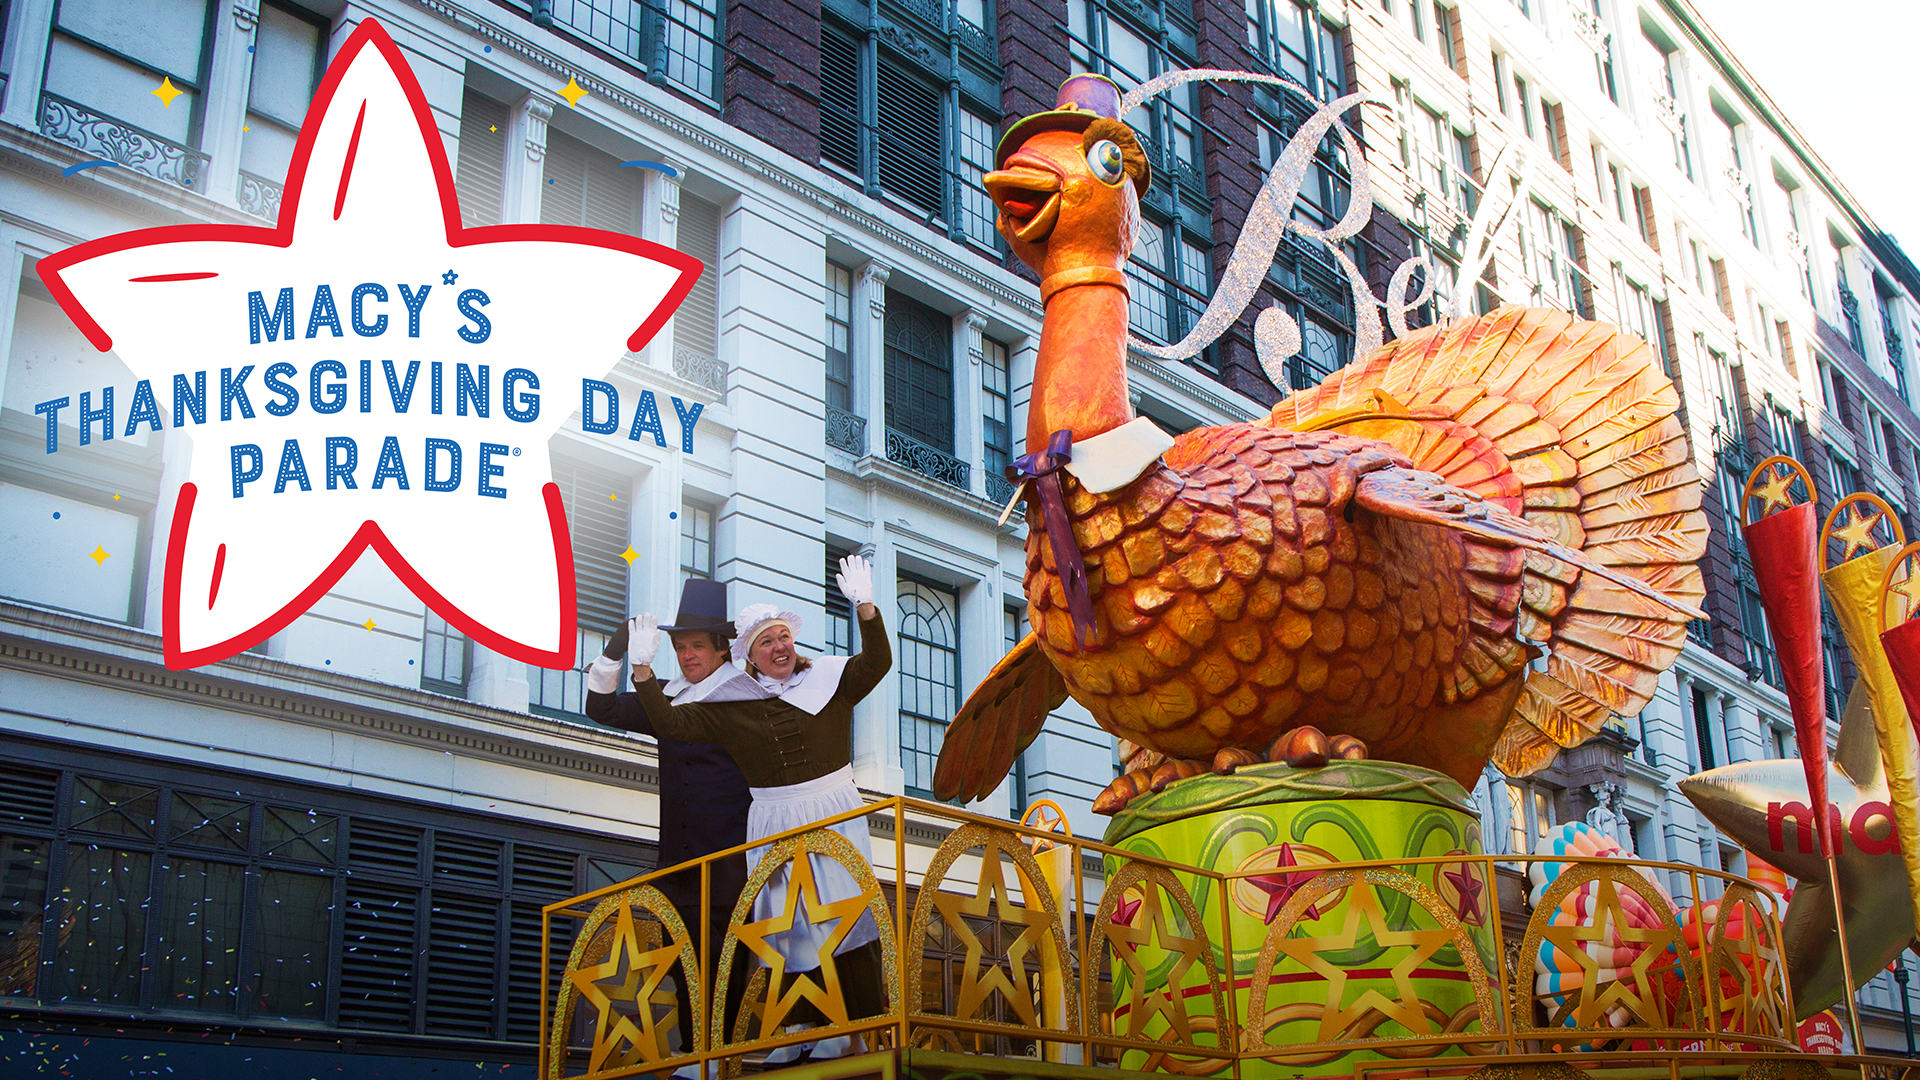 Macy's Thanksgiving Day Parade Photo Galleries